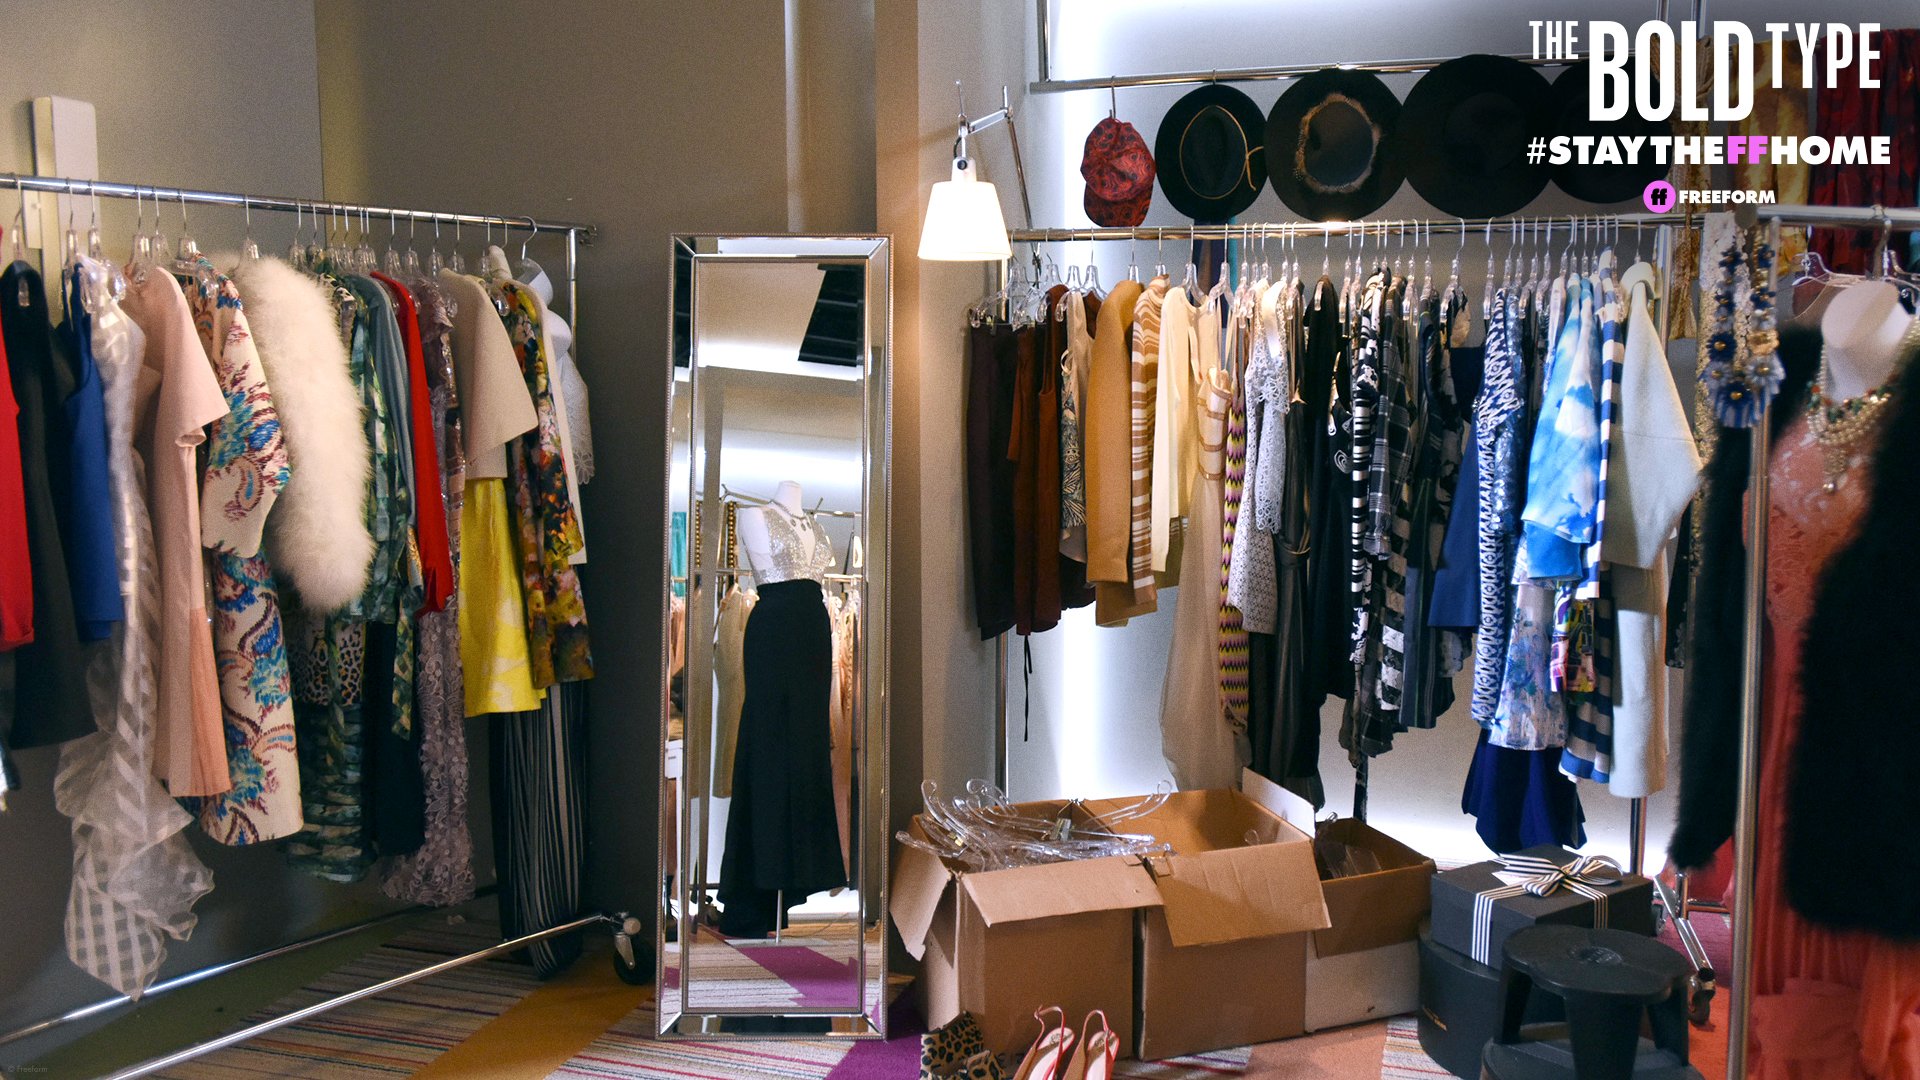 The Bold Type - Clothes racks